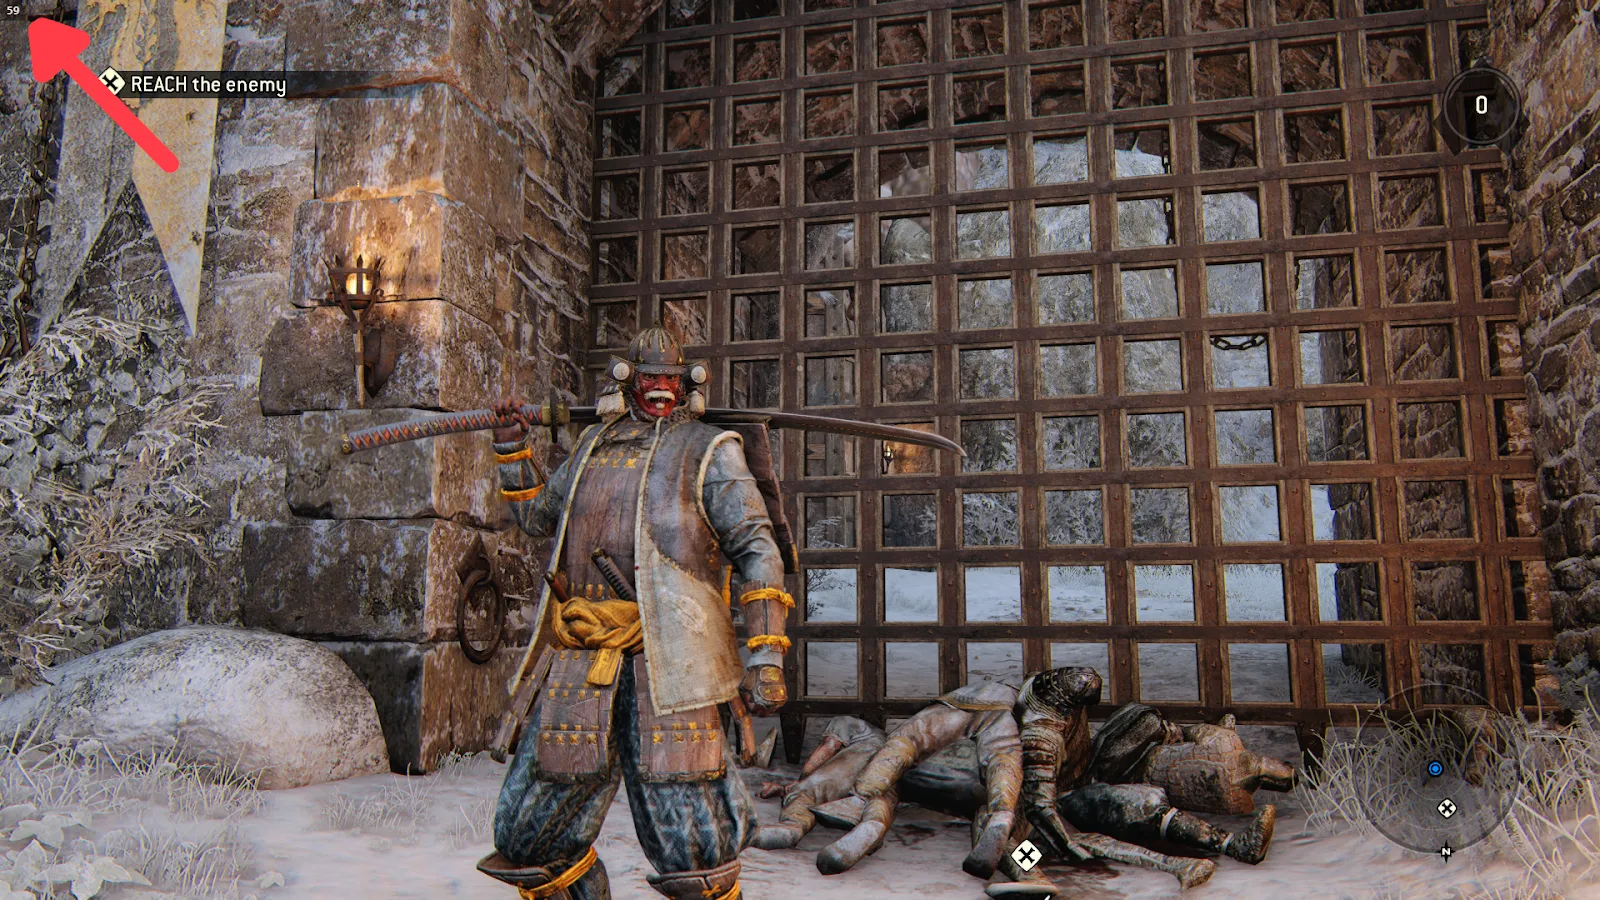 Ubisoft Overlay show FPS demonstration image in For Honor